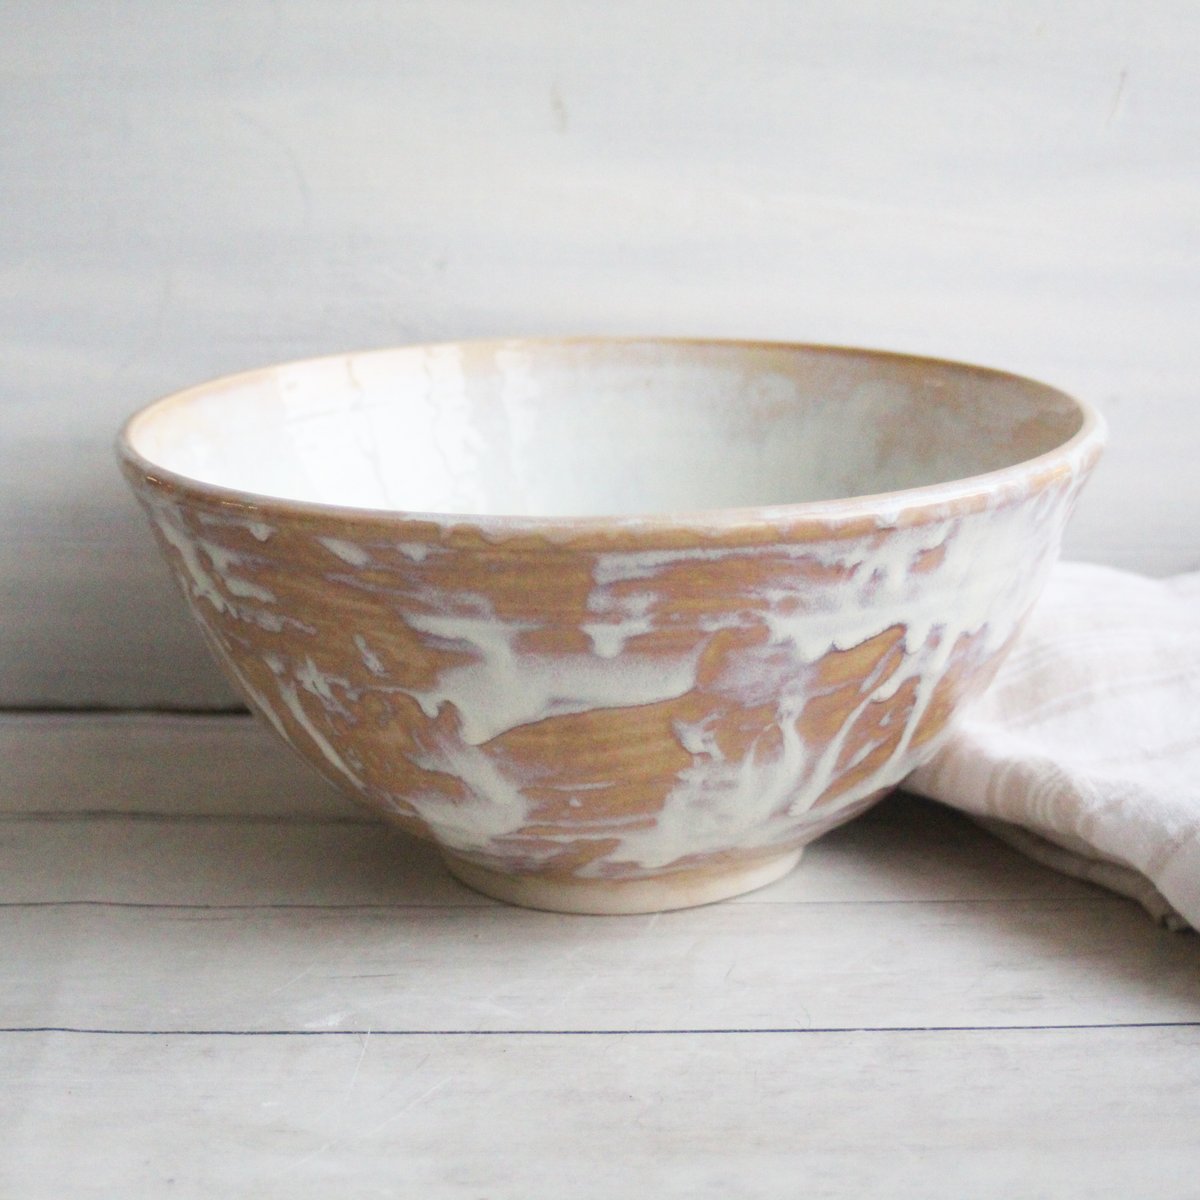 Andover Pottery — Rustic Raw Stoneware Prep Bowl in Brown Speckled Glaze  Handcrafted in USA